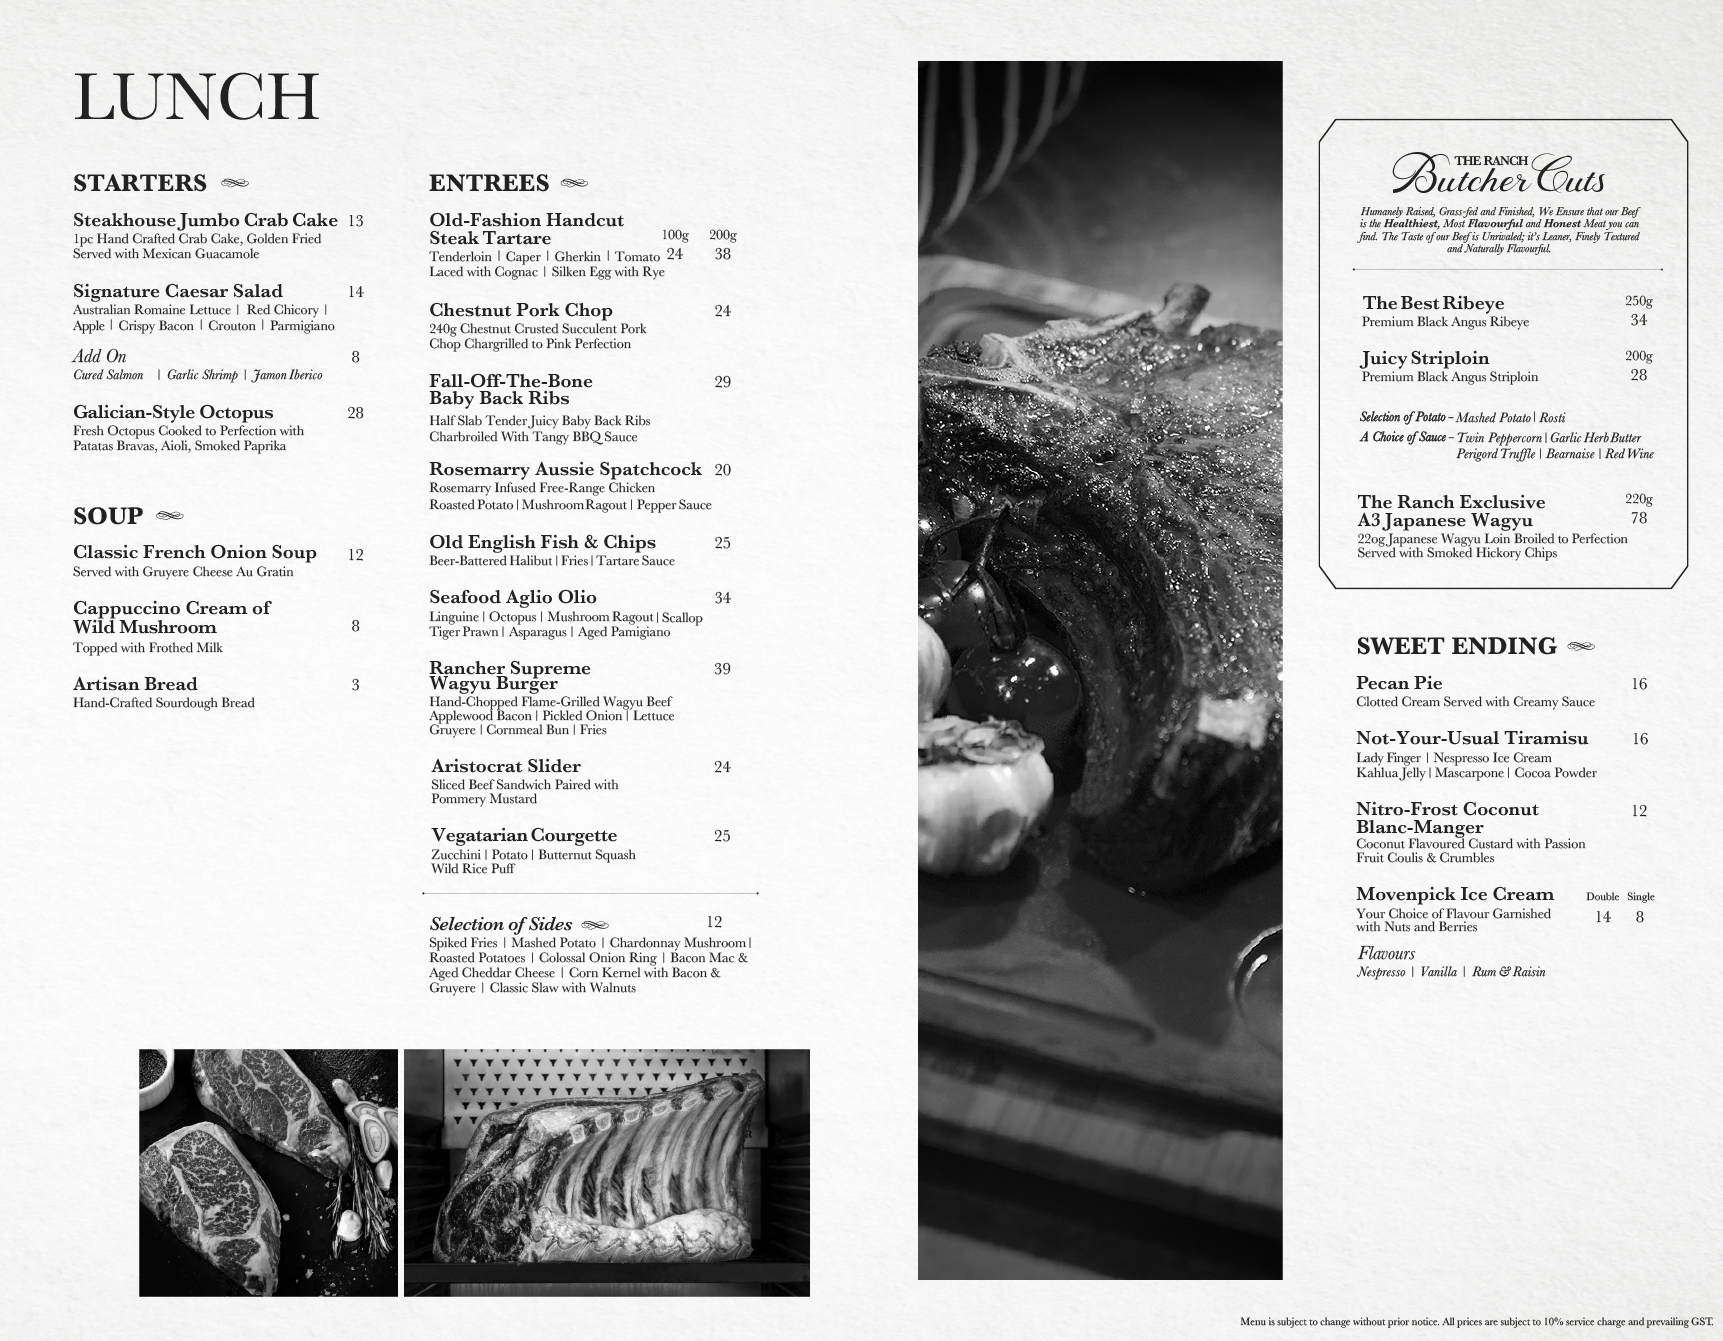 The RANCH Lunch Menu